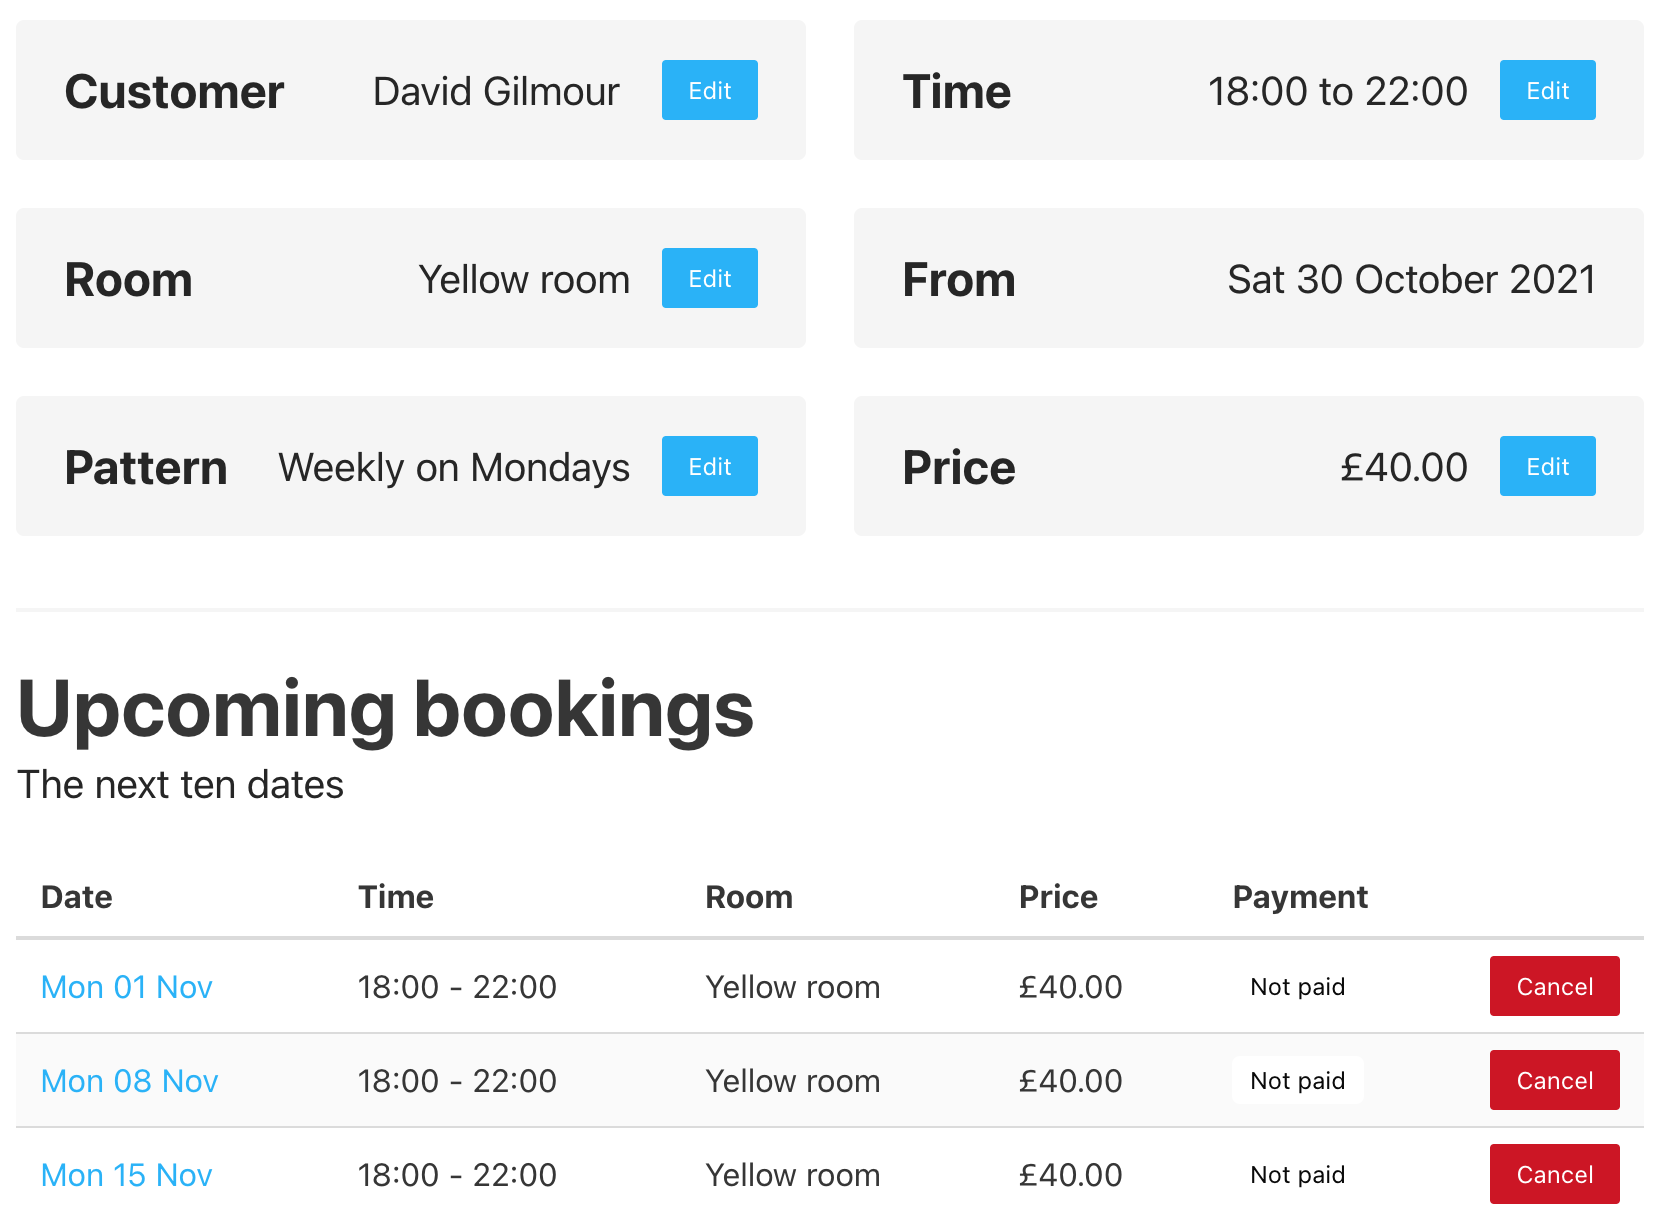 A regular booking details page for David Gilmour